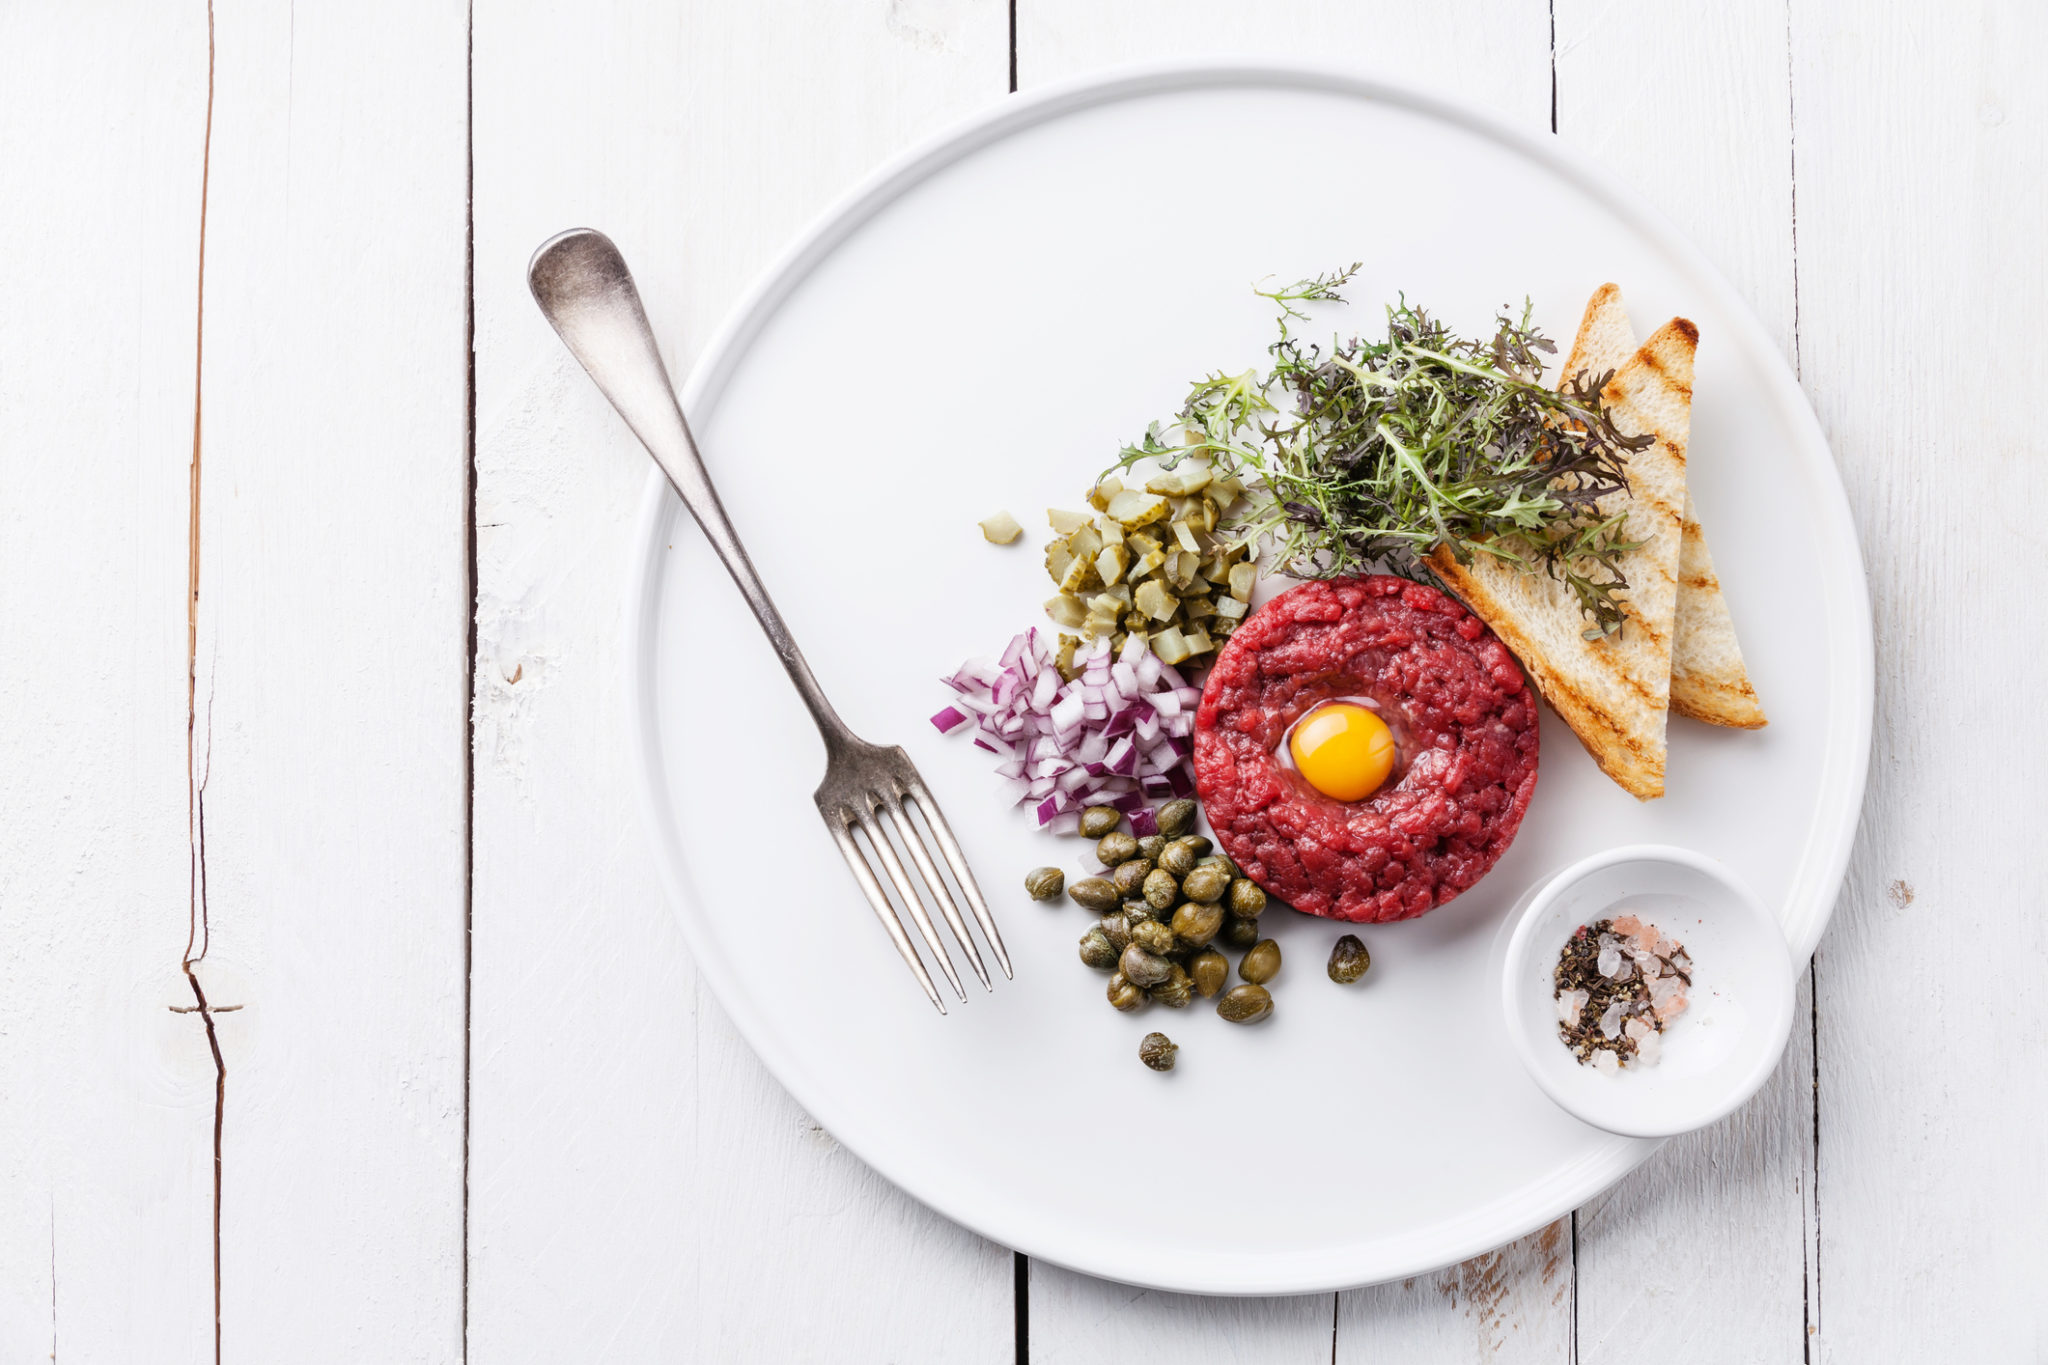 Steal tartare is a delicacy across many European countries. 